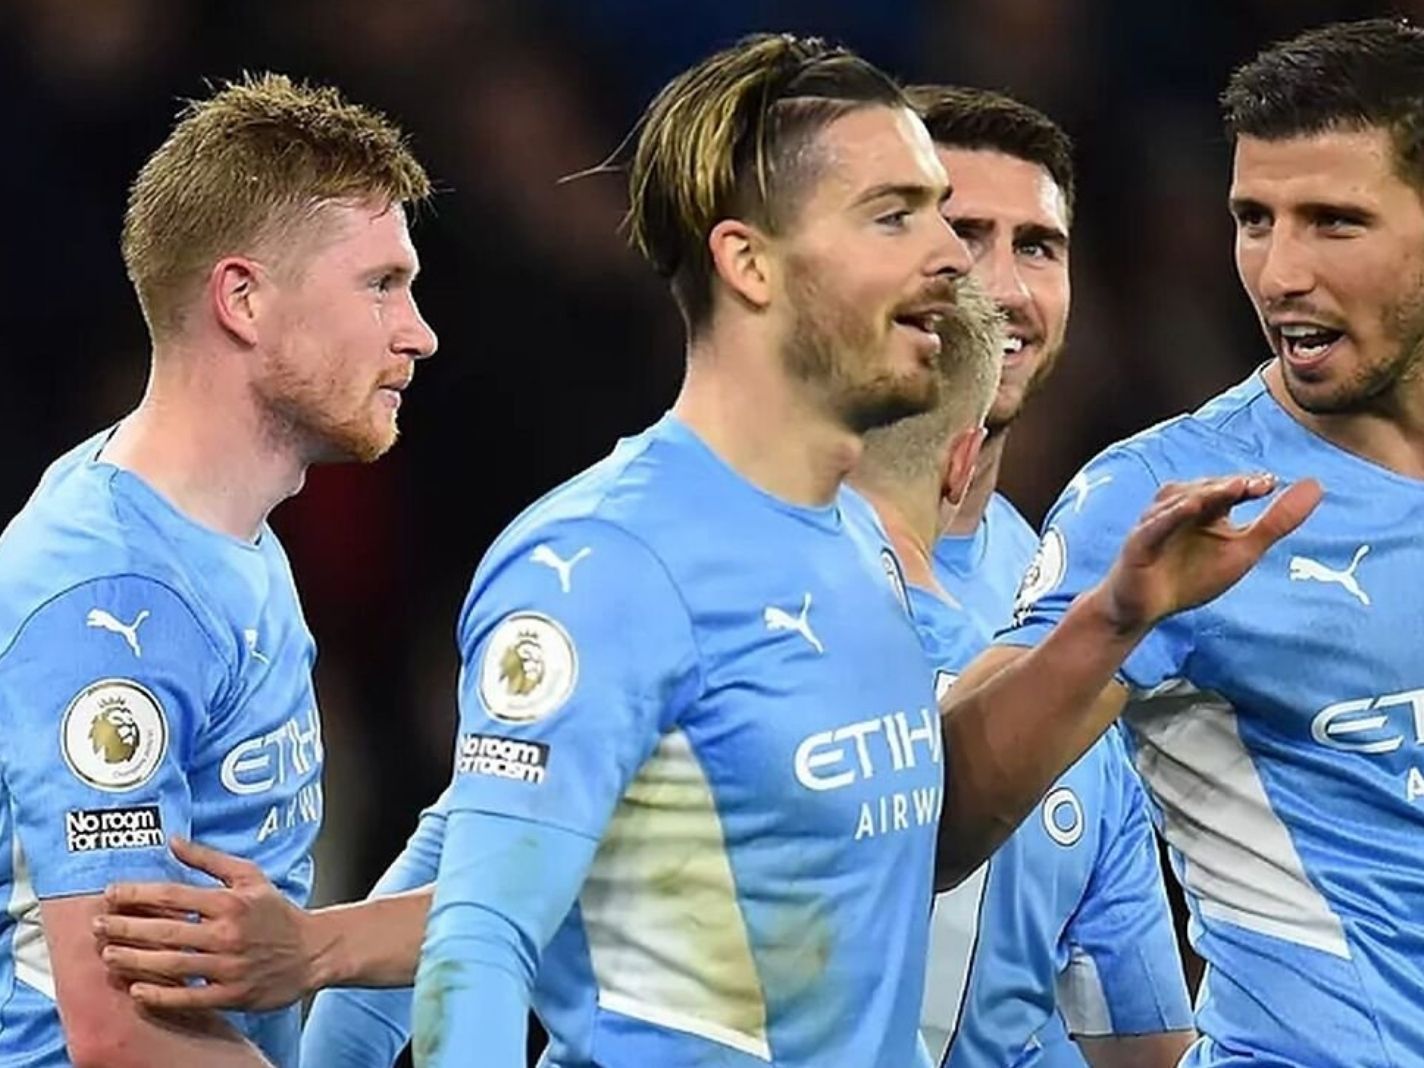 Man City players celebrate a goal during their 6-3 Boxing Day win against Leicester City